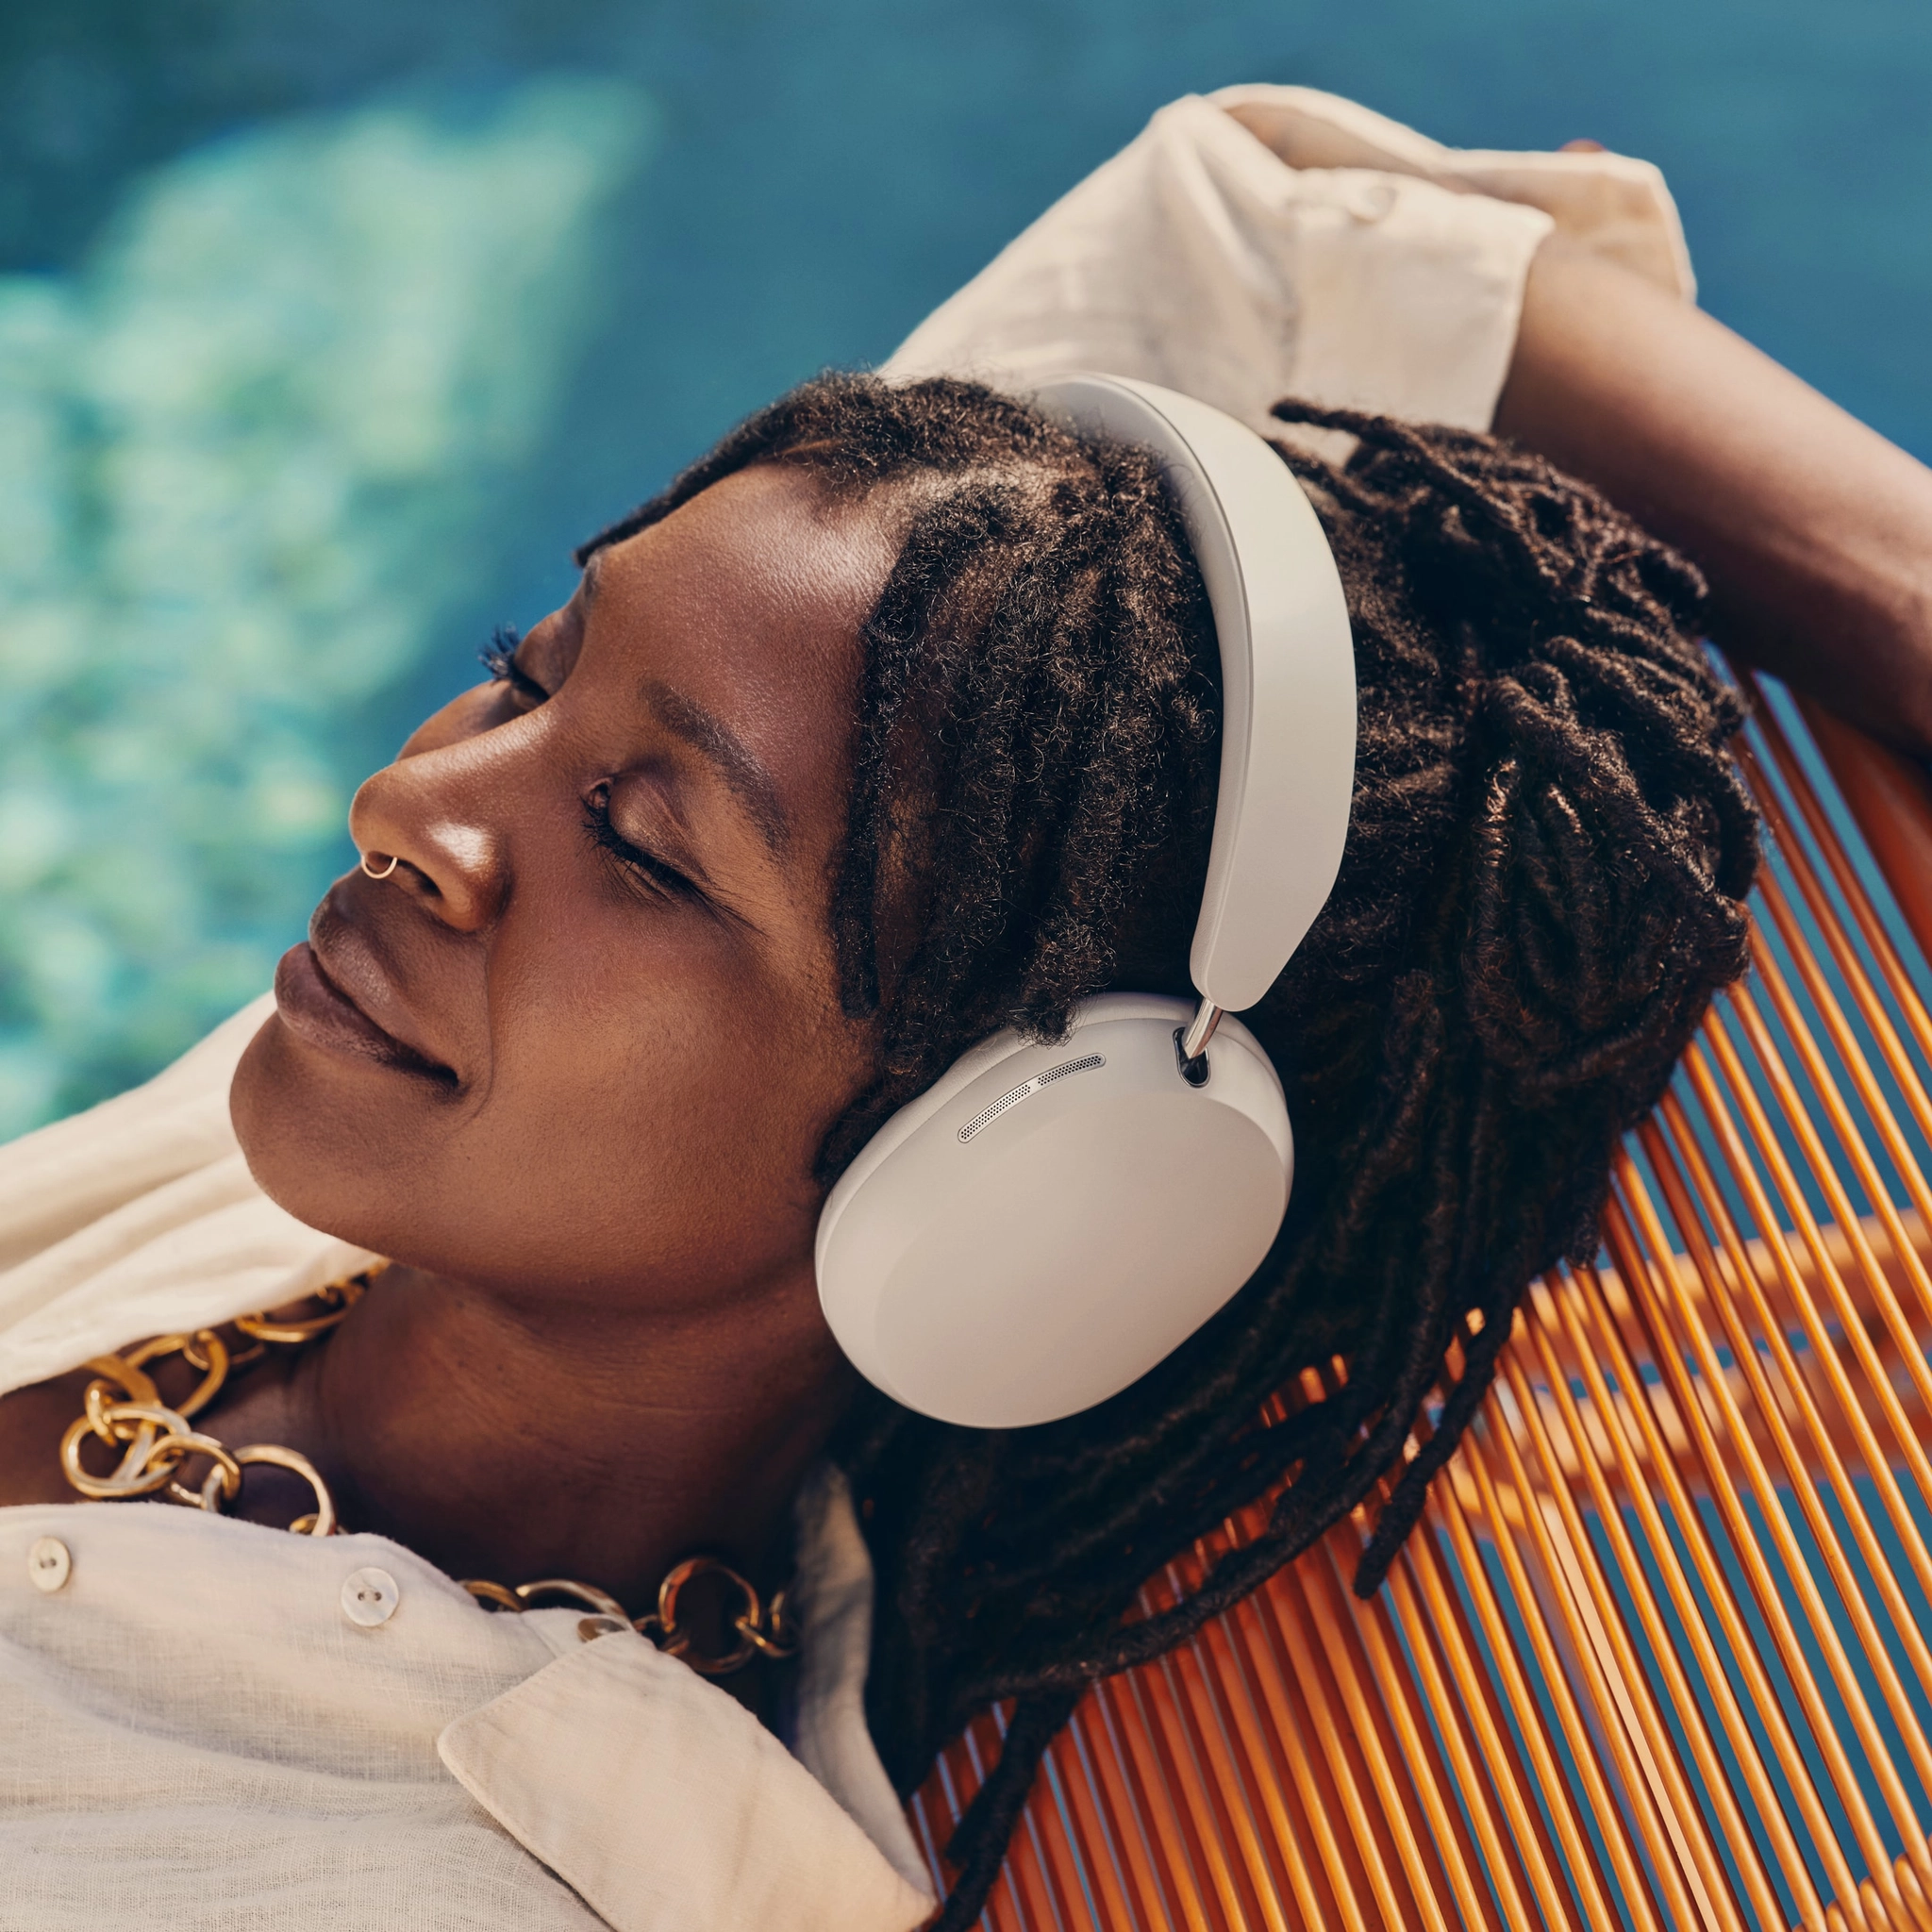 Sonos Ace Headphones - A Person With Dreadlocks Wearing Sonos Ace Headphones Relaxes On An Orange Striped Lounge Chair Near A Pool.